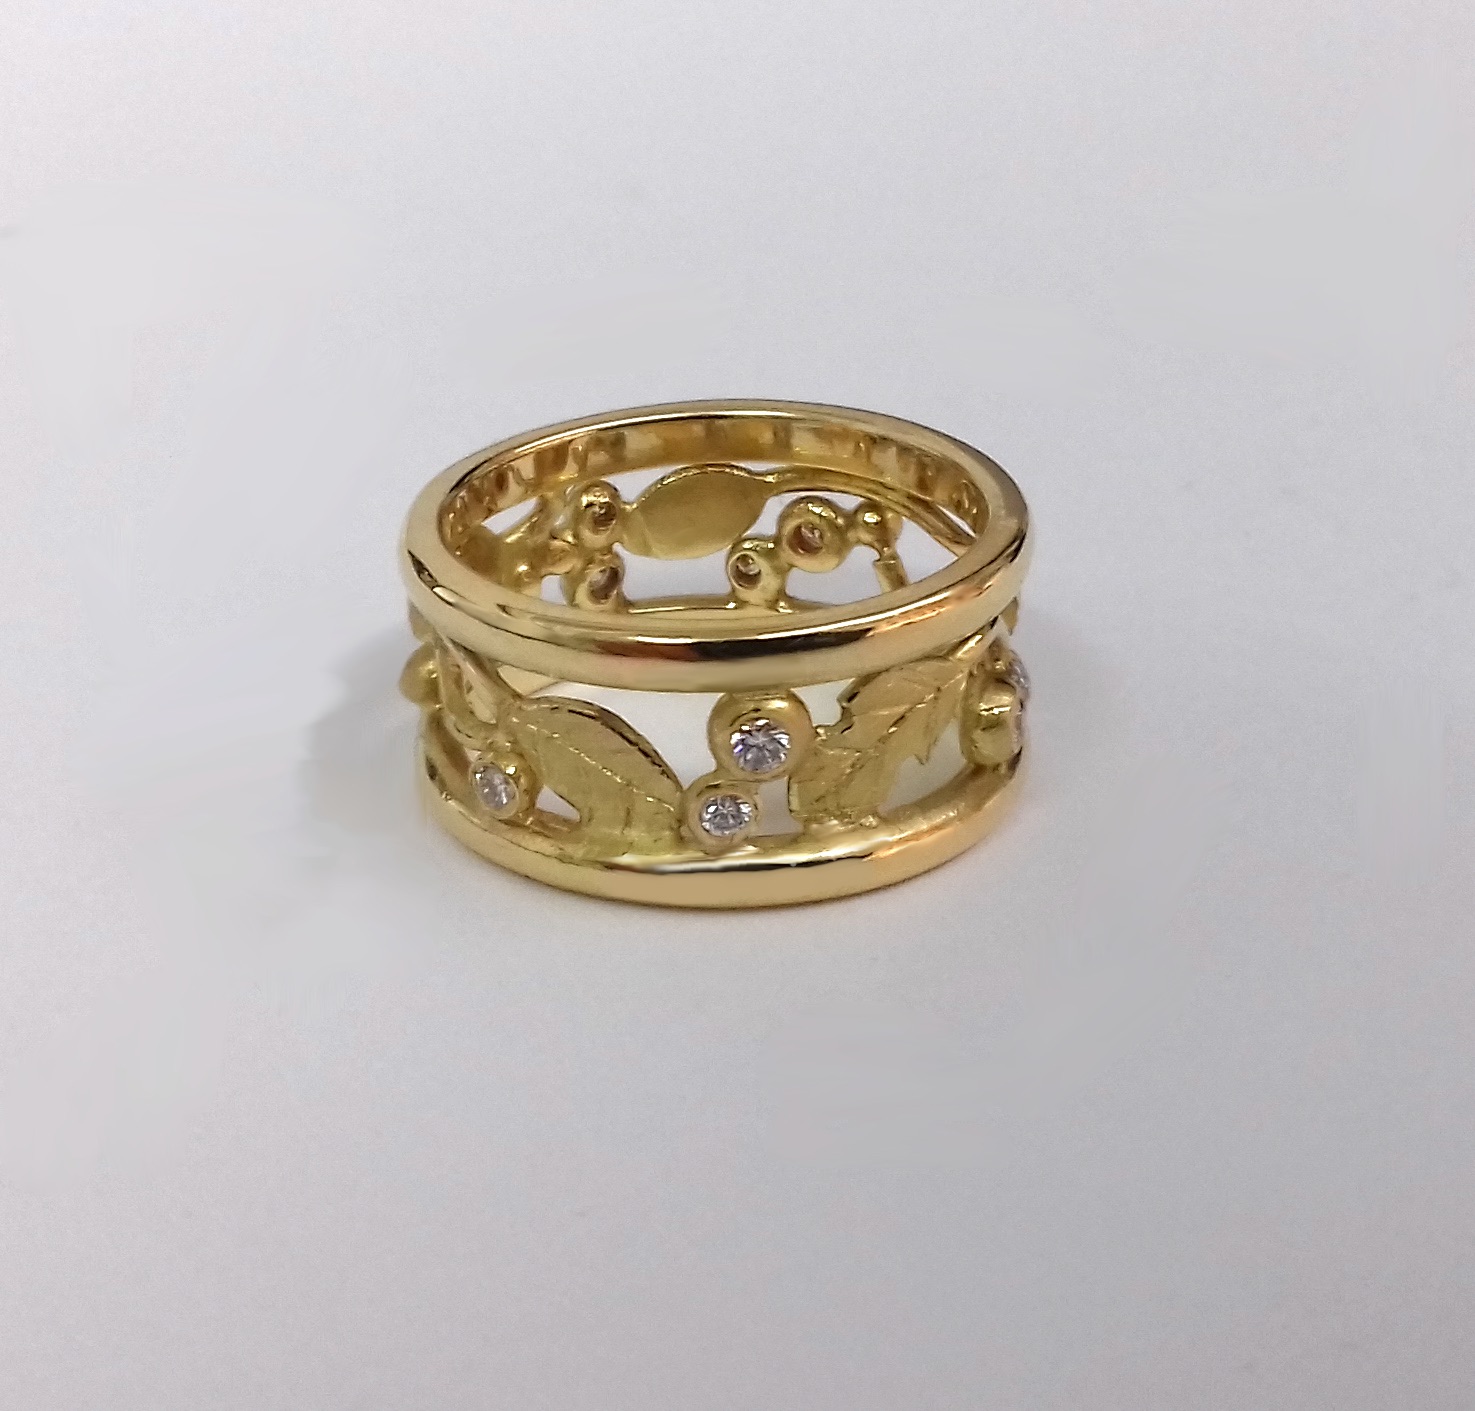 Roman influenced Leaf Ring in 18ct yellow gold and diamonds